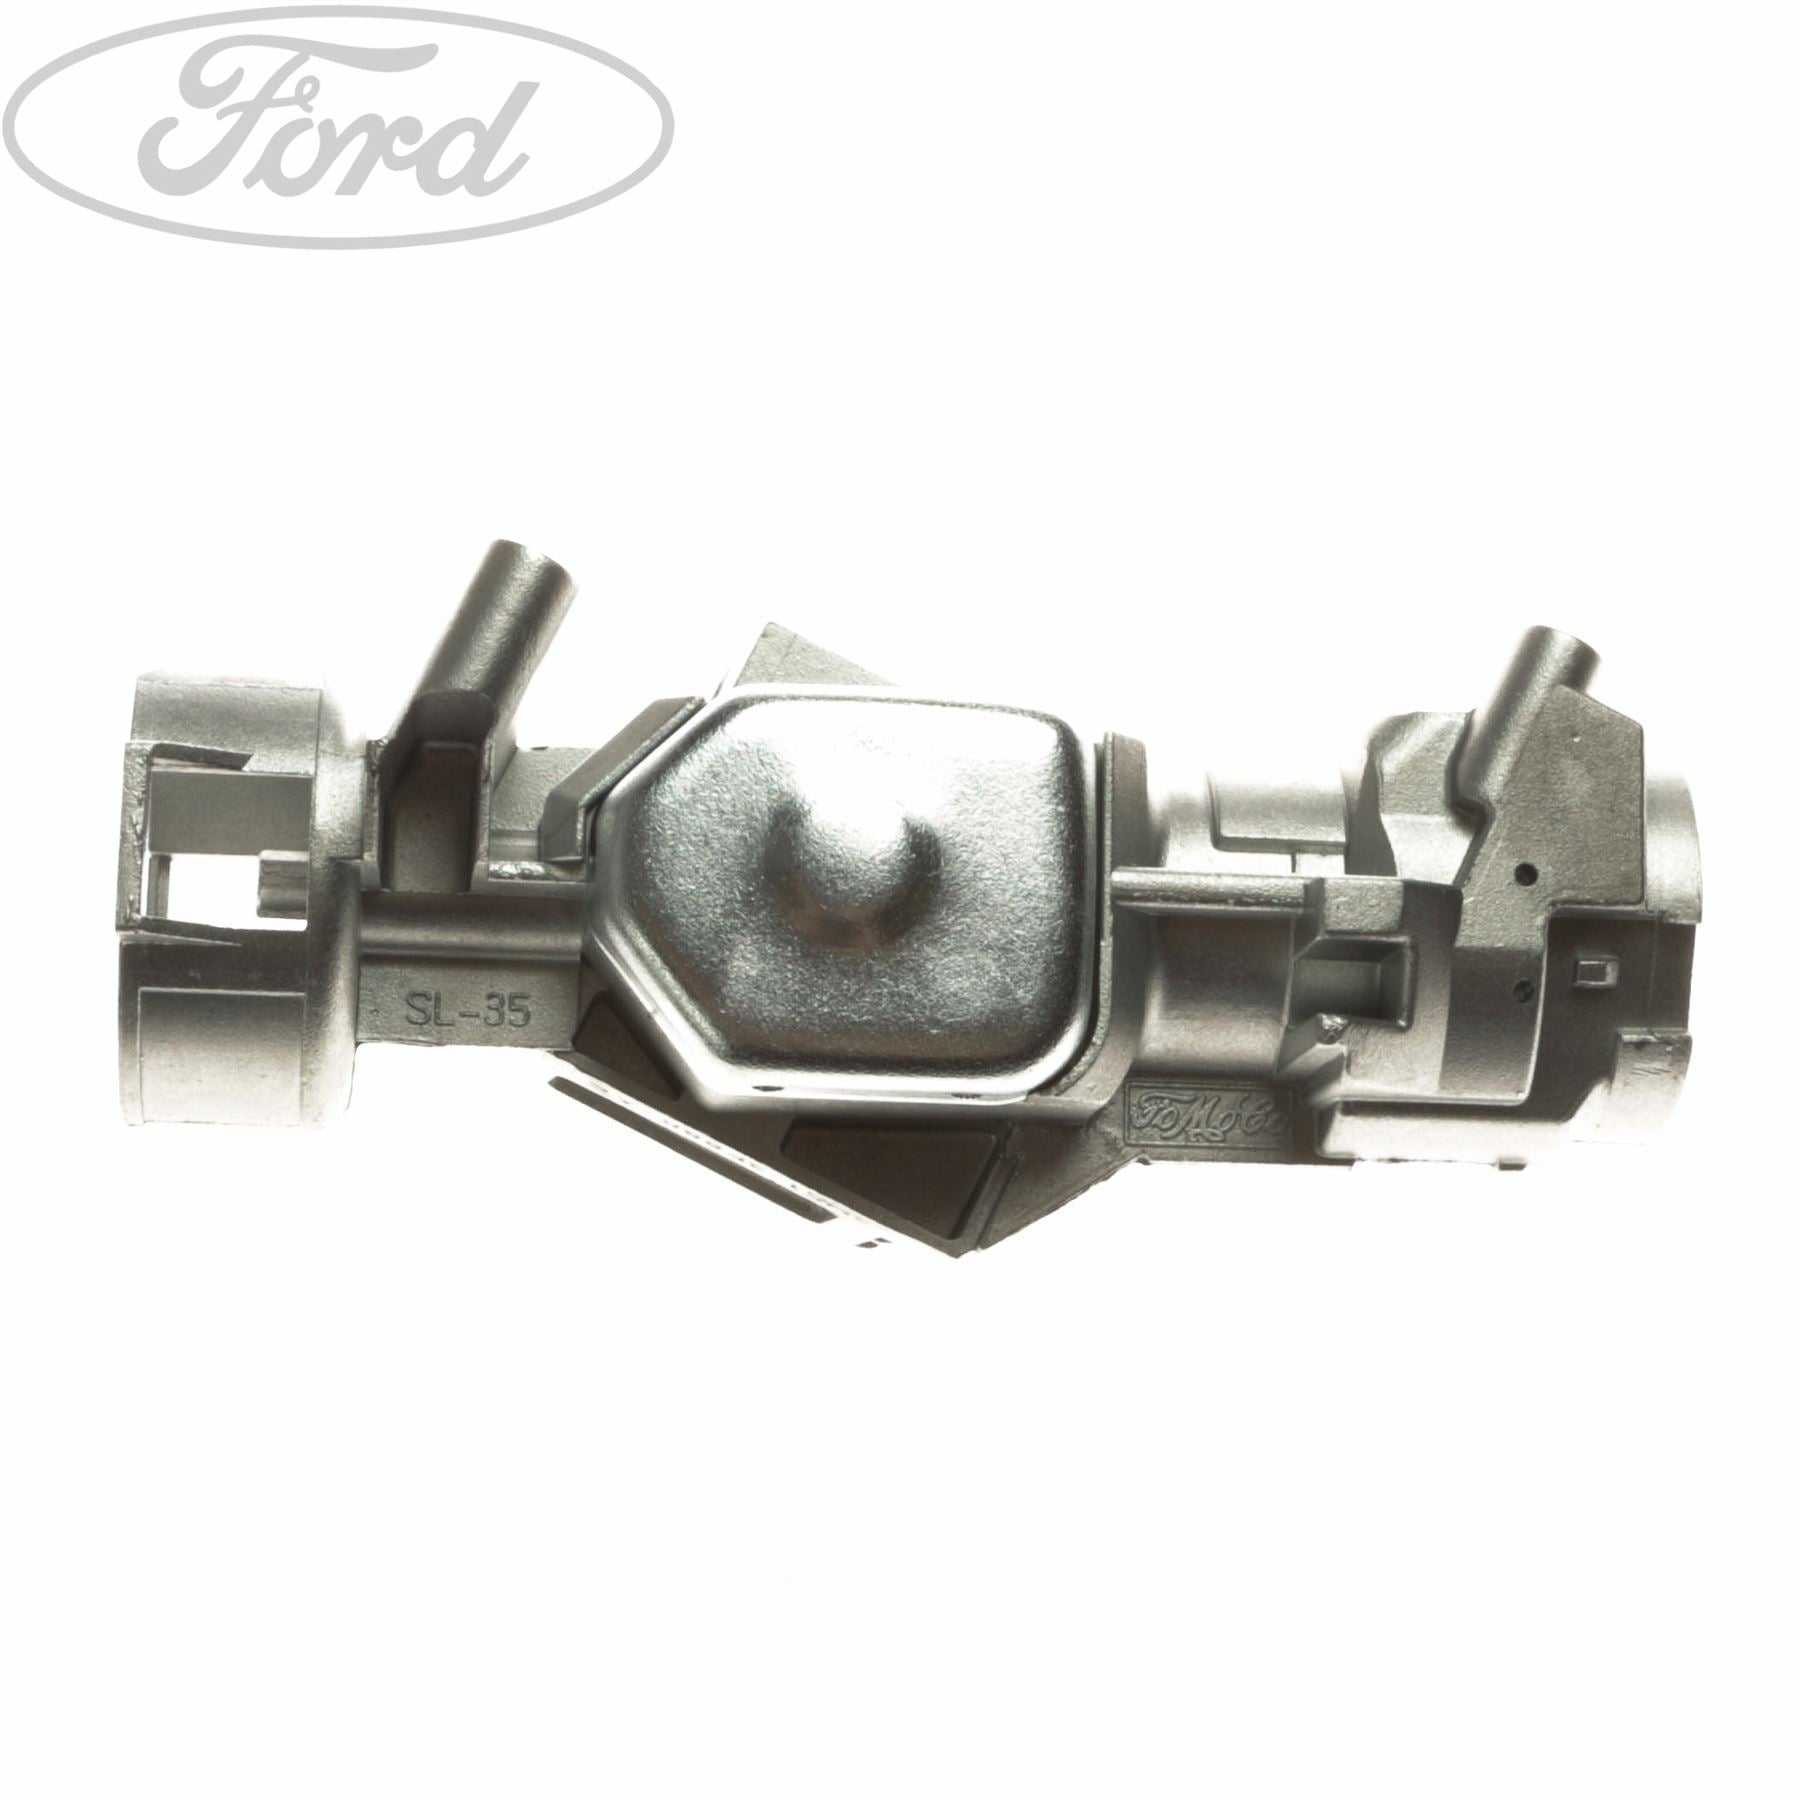 Ford, STEERING AND IGNITION LOCK